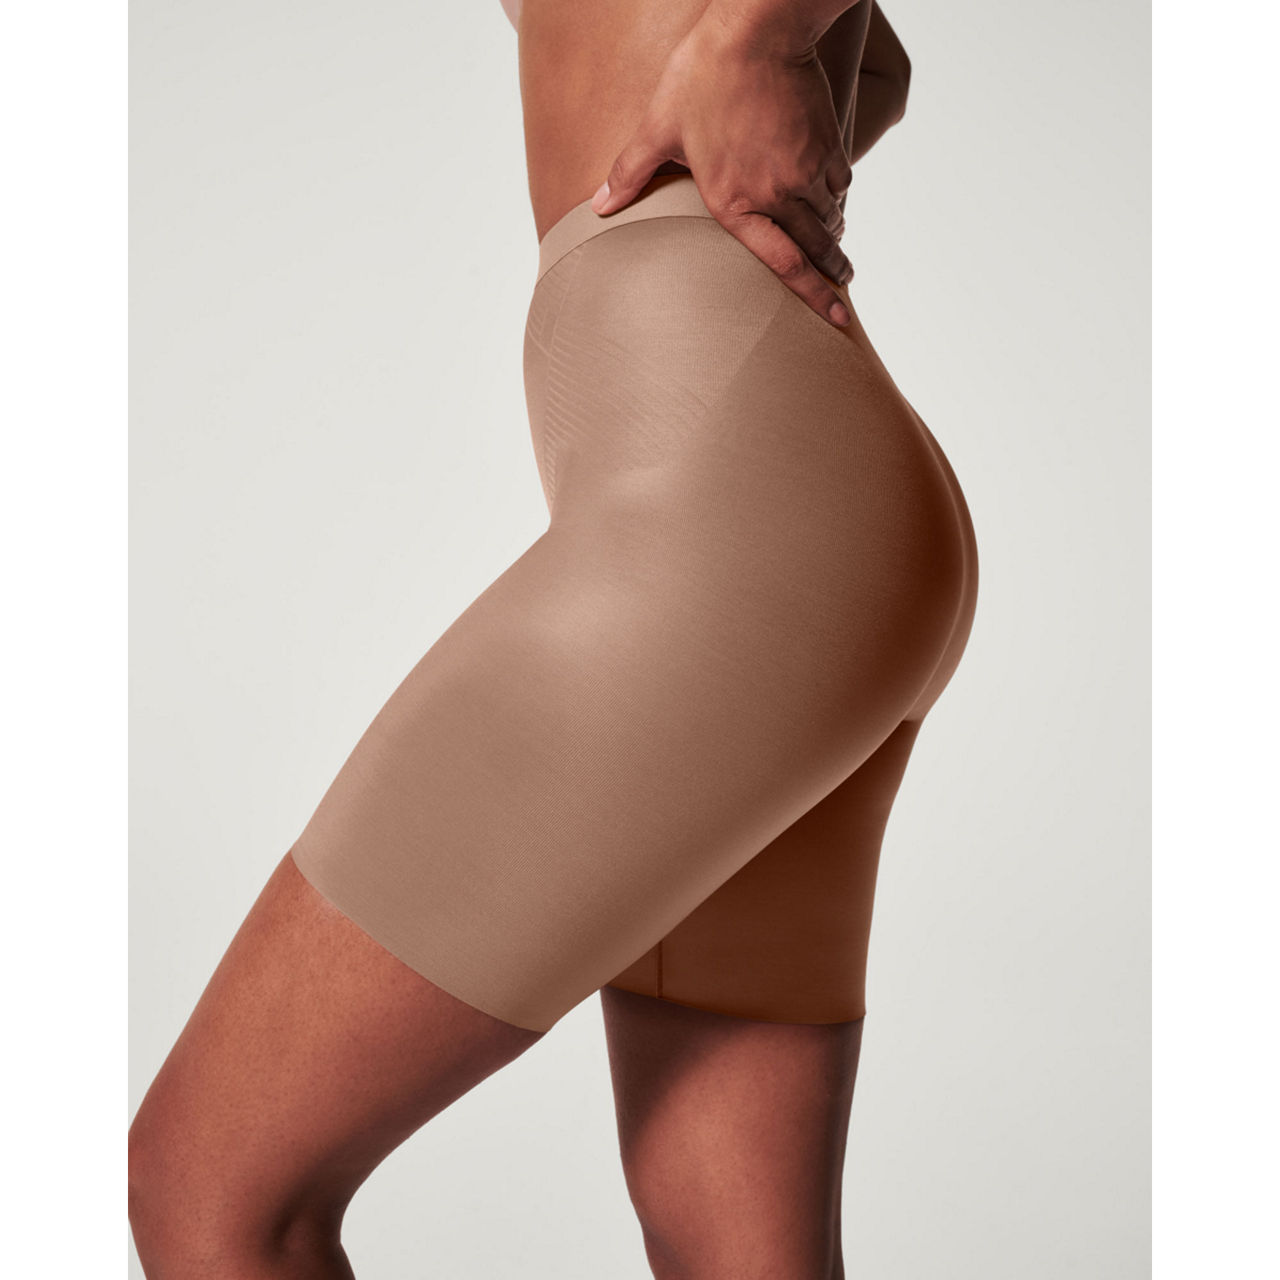 SPANX Luxe Leg High-Waist Sheers Firm Control Pantyhose, C, - Import It All